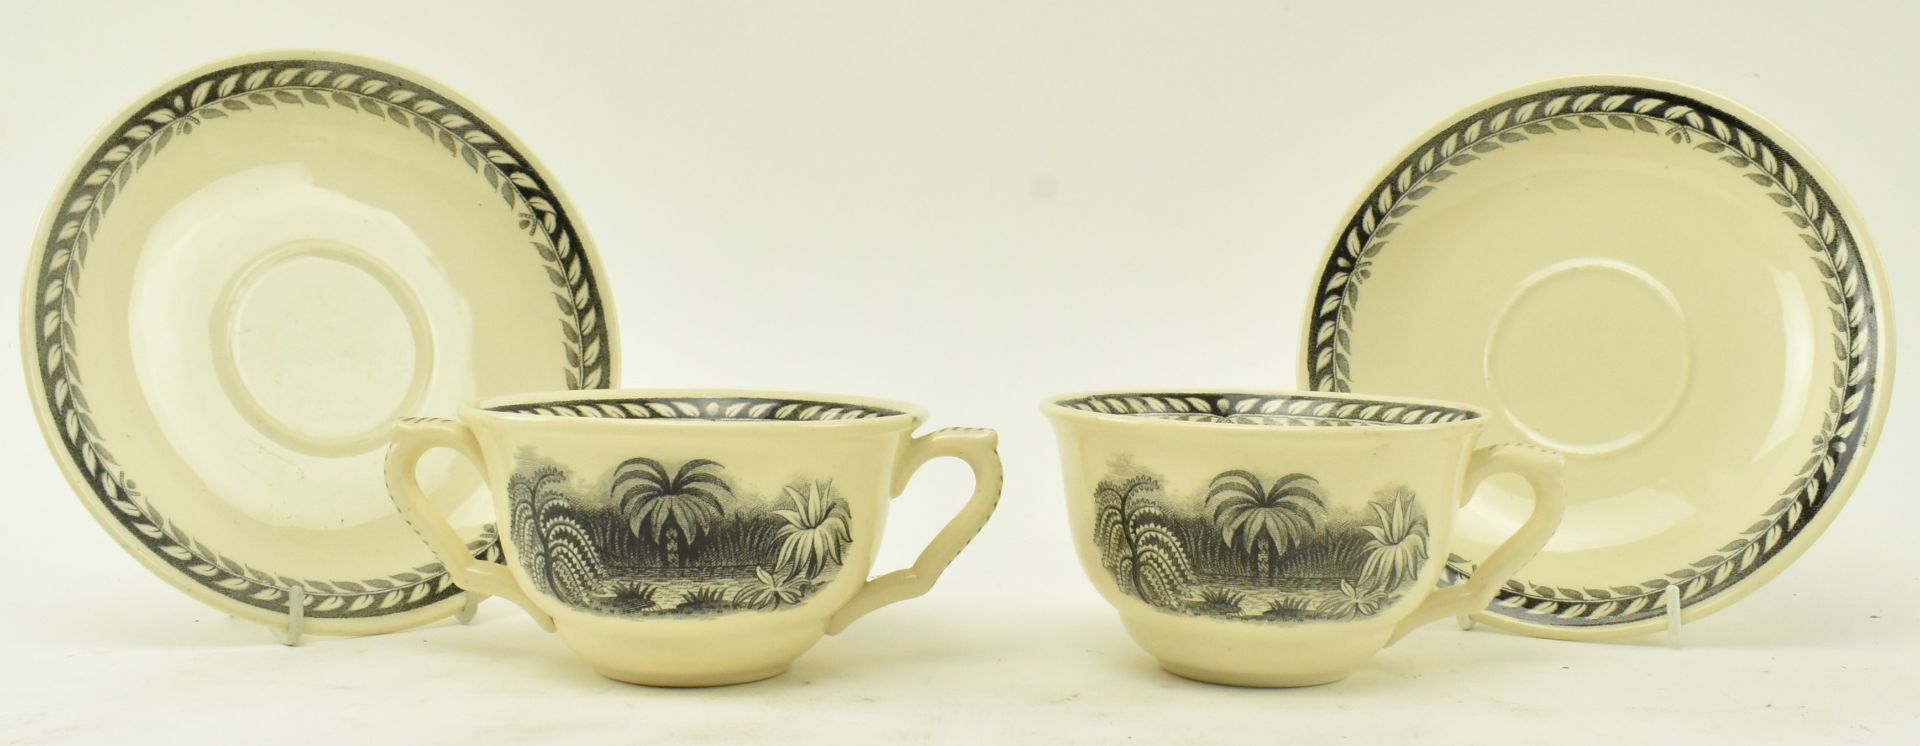 ARTHUR PERCY - EXOTICA - EARLY 20TH CENTURY PART DINNER SERVICE - Image 9 of 13